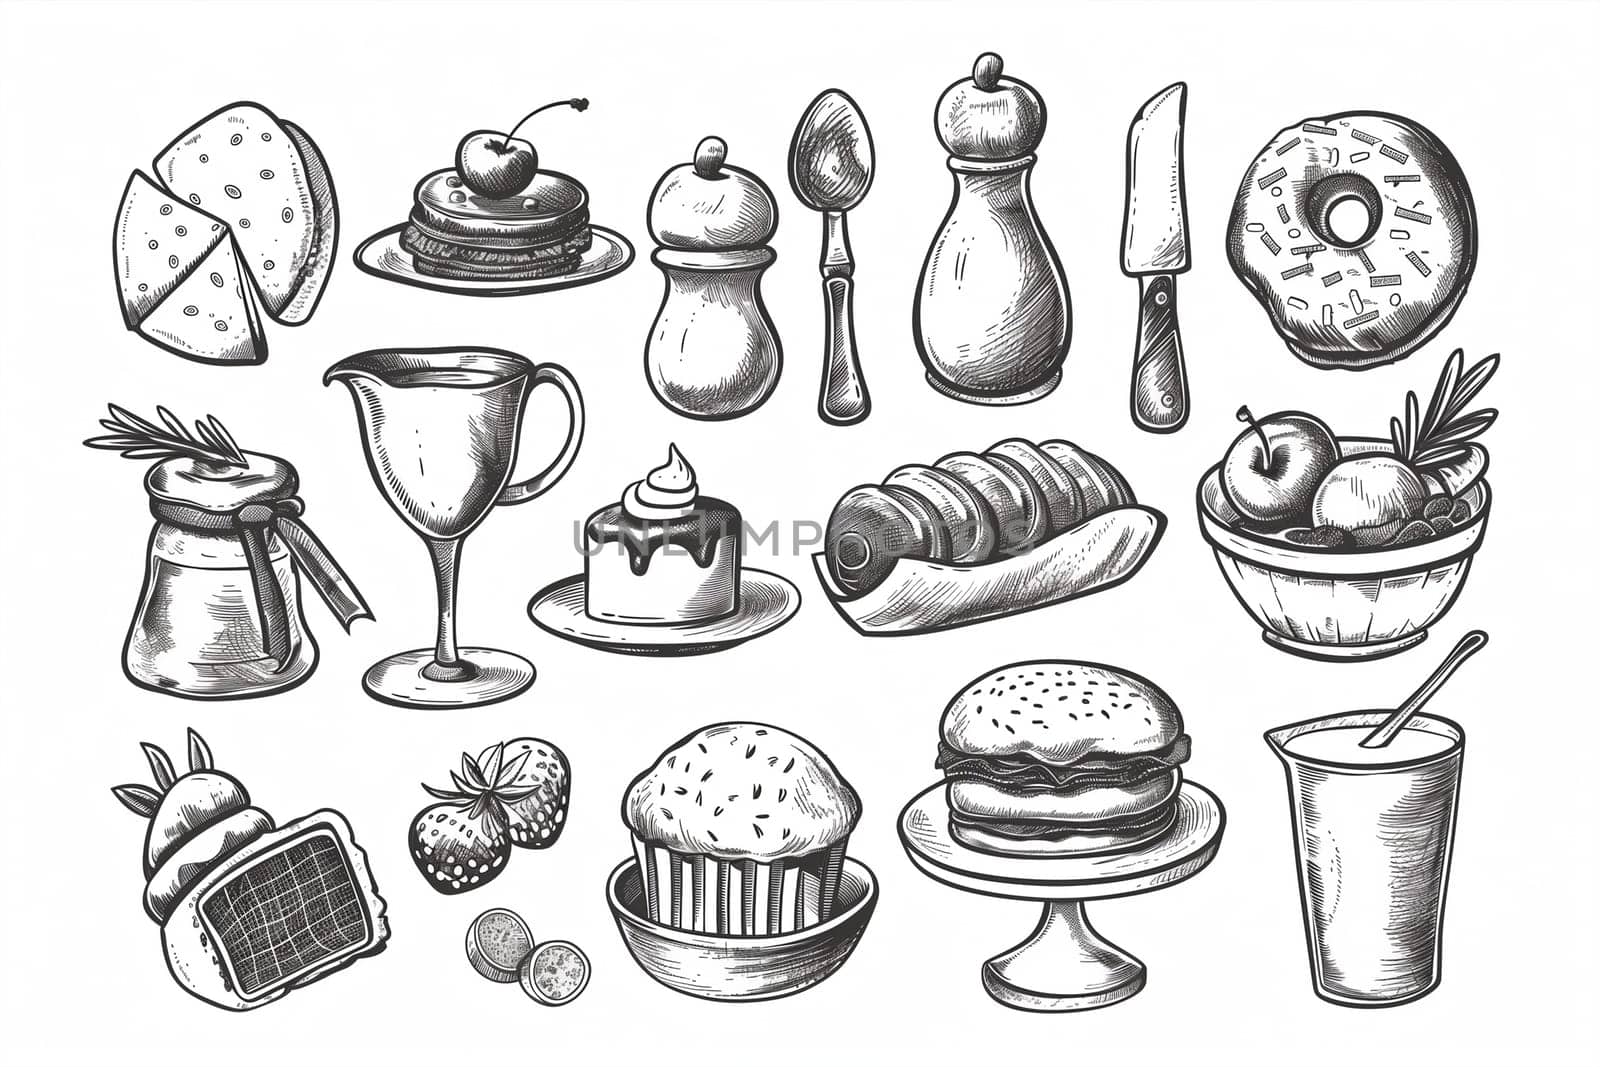 A drawing showing a variety of delicious desserts such as cupcakes, pies, cookies, and ice cream in a colorful and appetizing display.